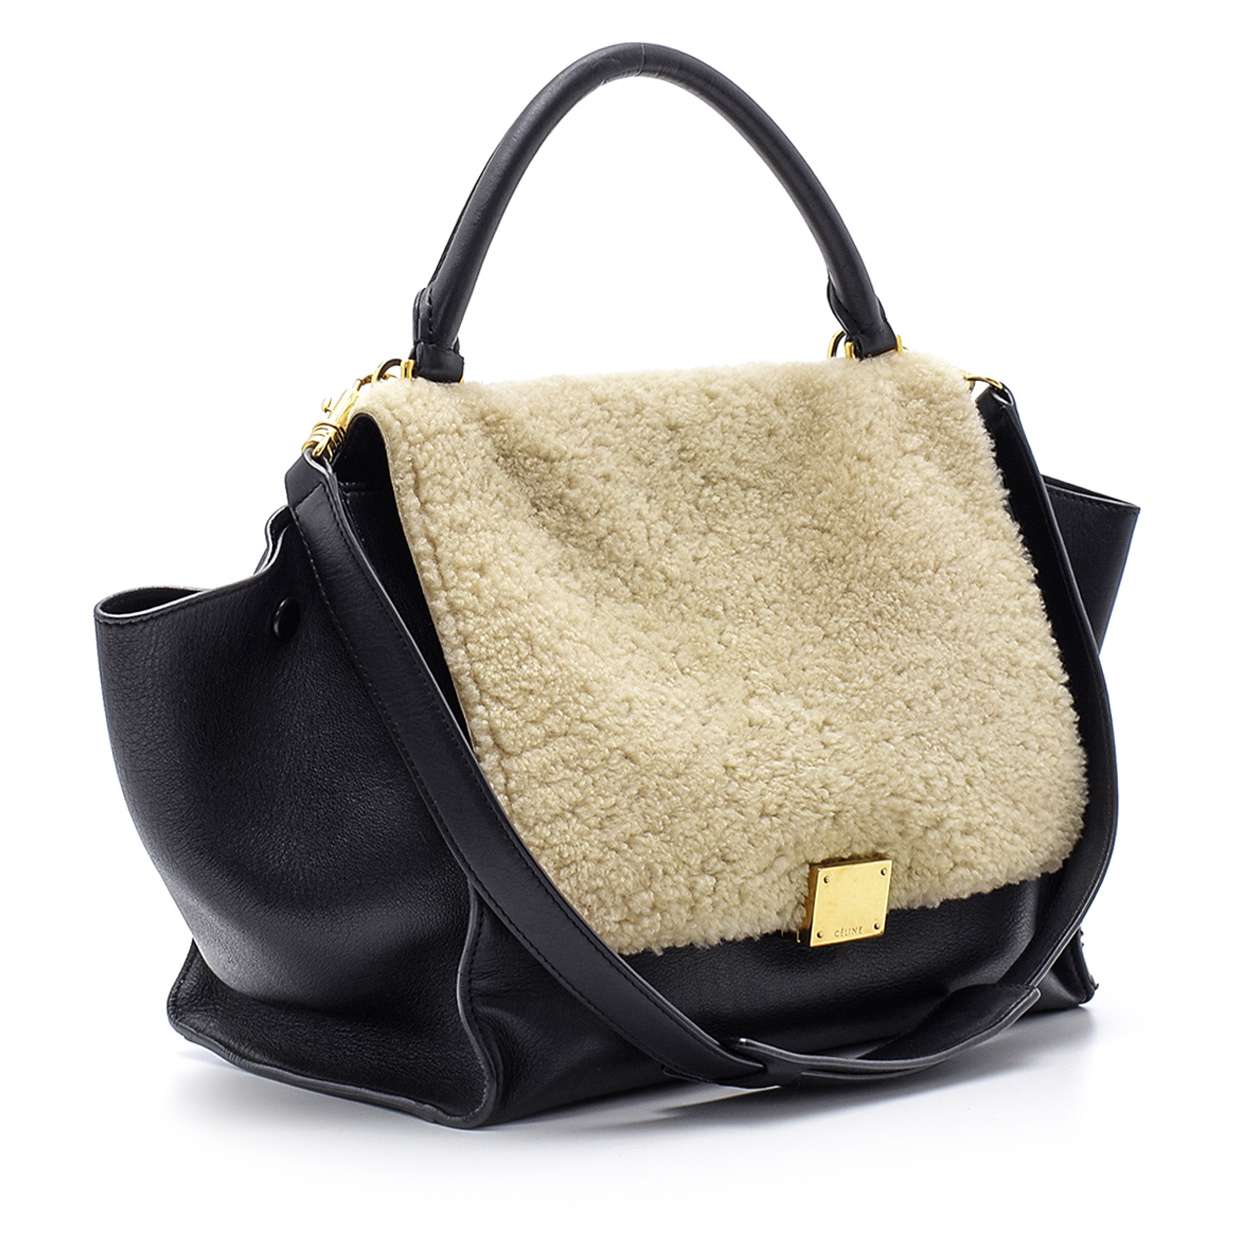 Celine -  Black Leather And Shearling Trapeze Medium Bag 